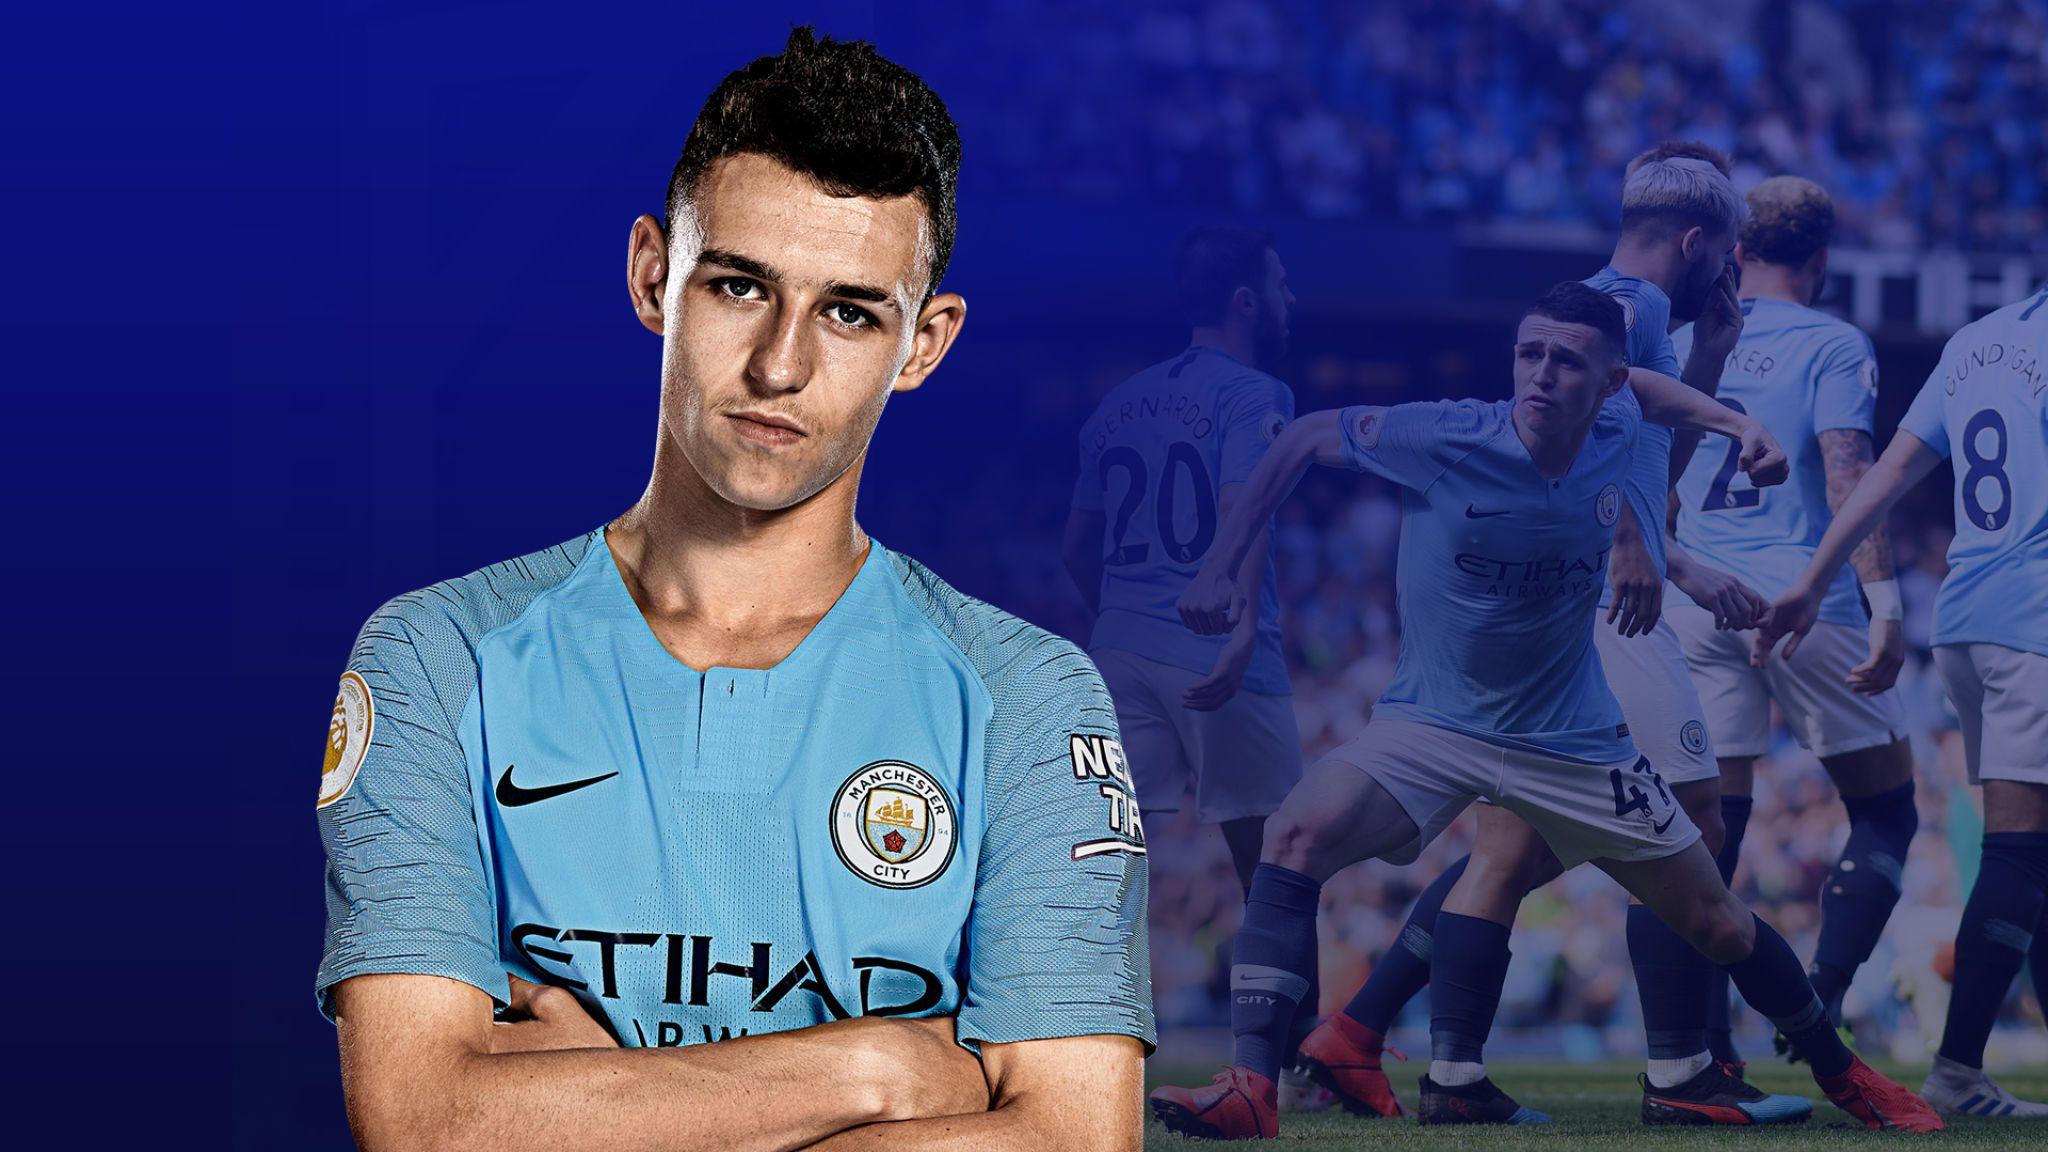 Pep Guardiola says Phil Foden is special and reveals first meeting